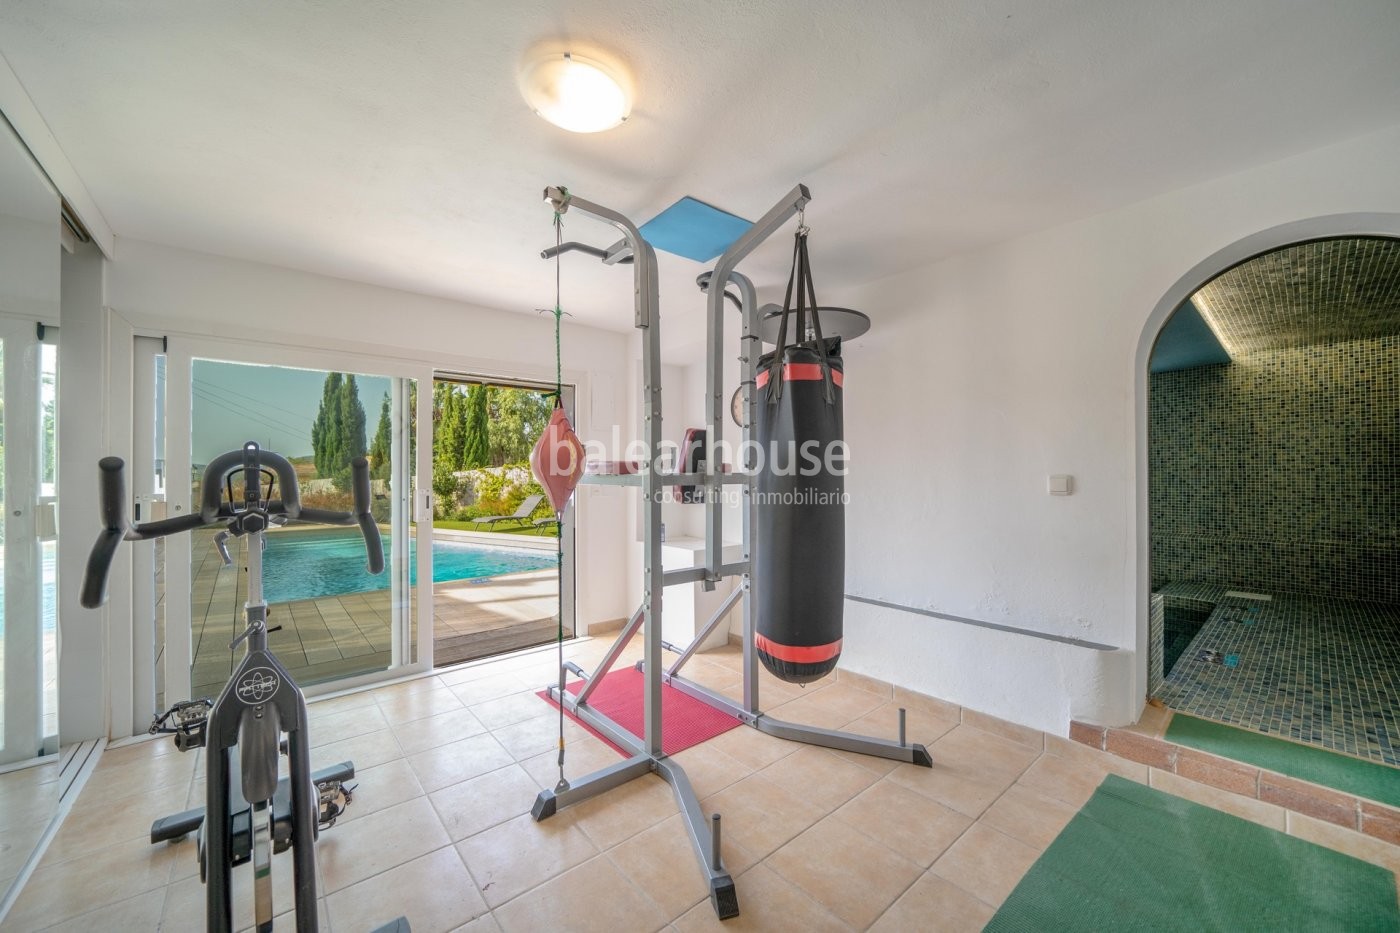 Bright villa with pool and Holiday Renta License in the beautiful town of Calvia